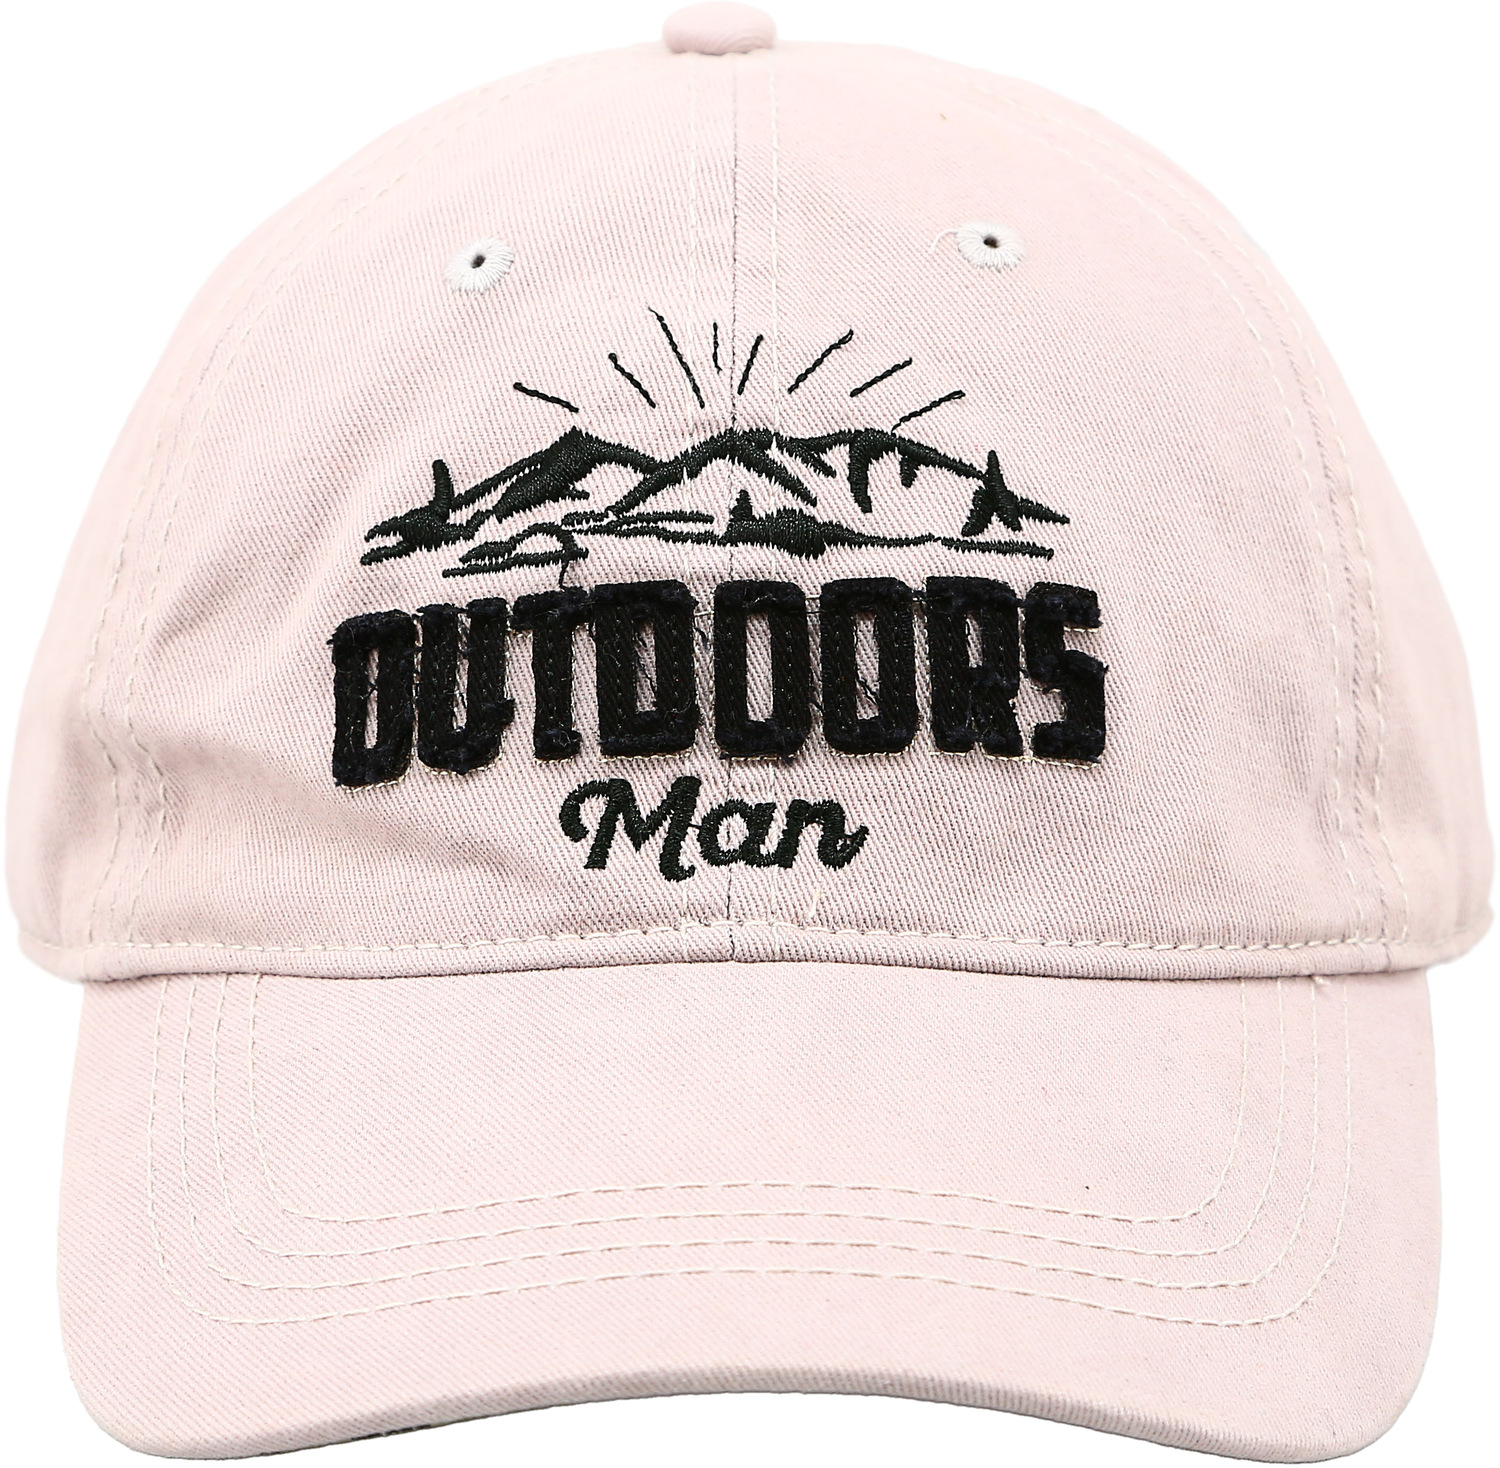 Outdoors Man by Man Out - Outdoors Man - Light Gray Adjustable Hat